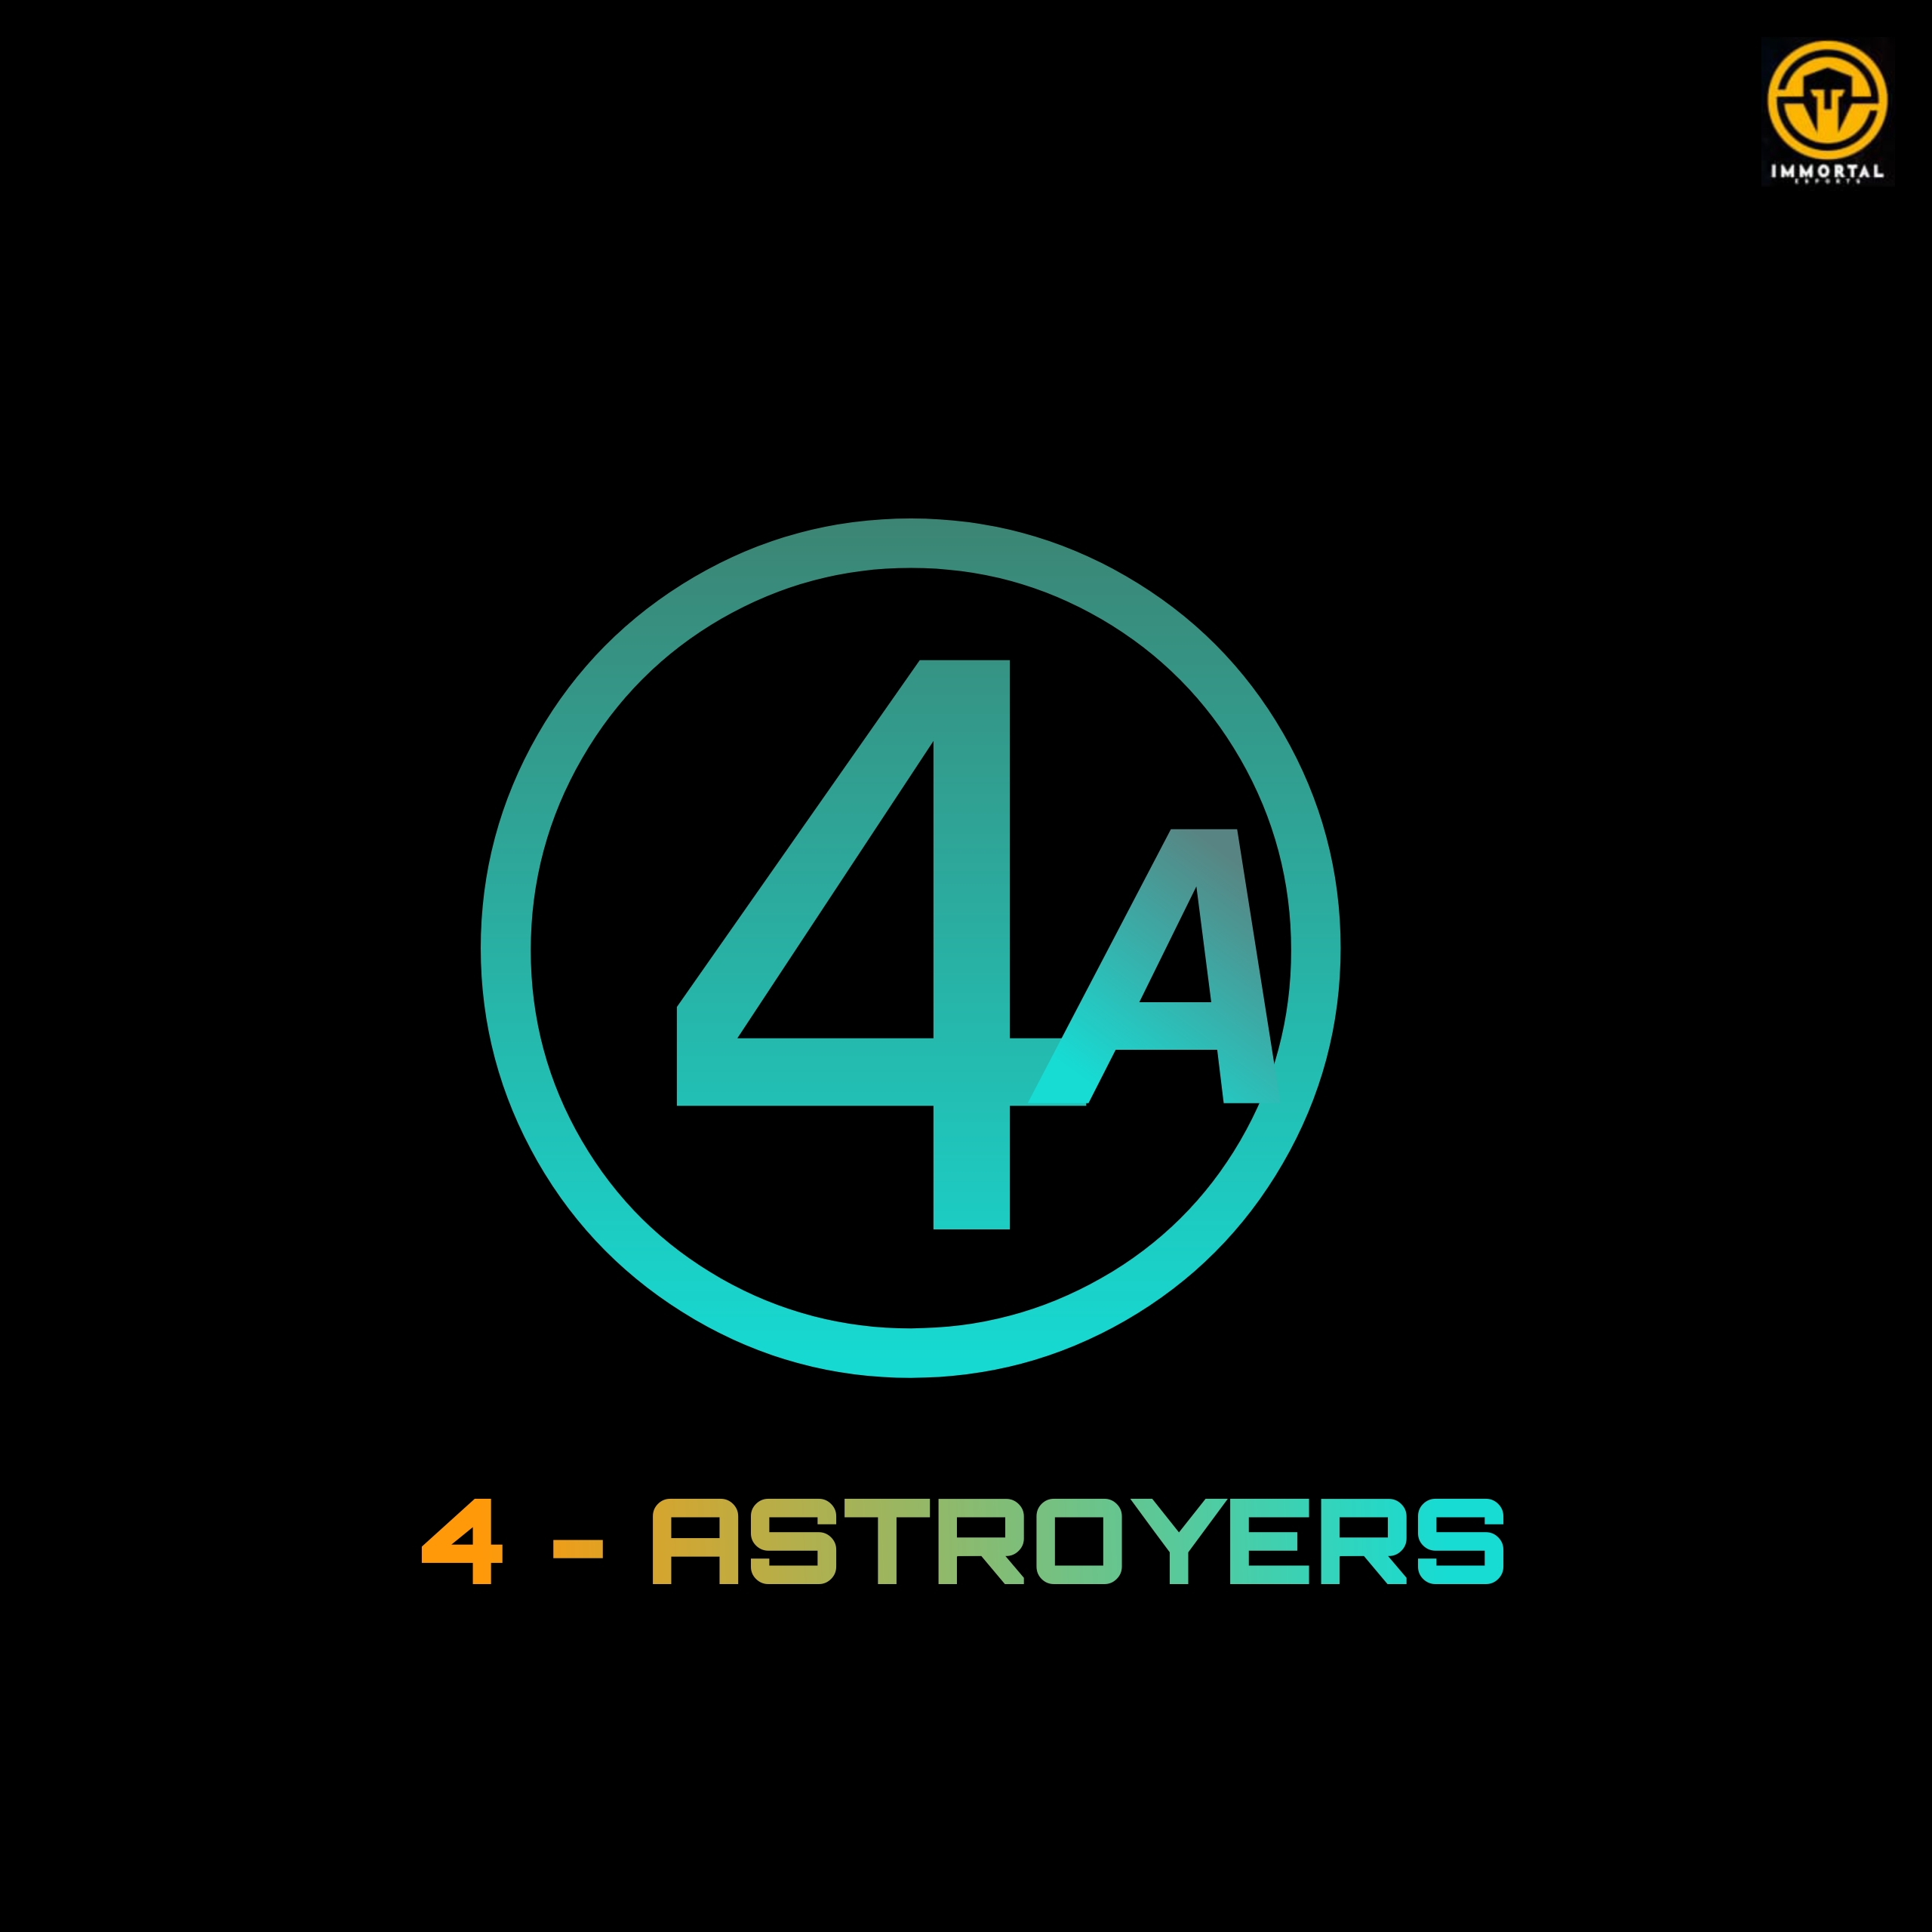 4ASTROYERS